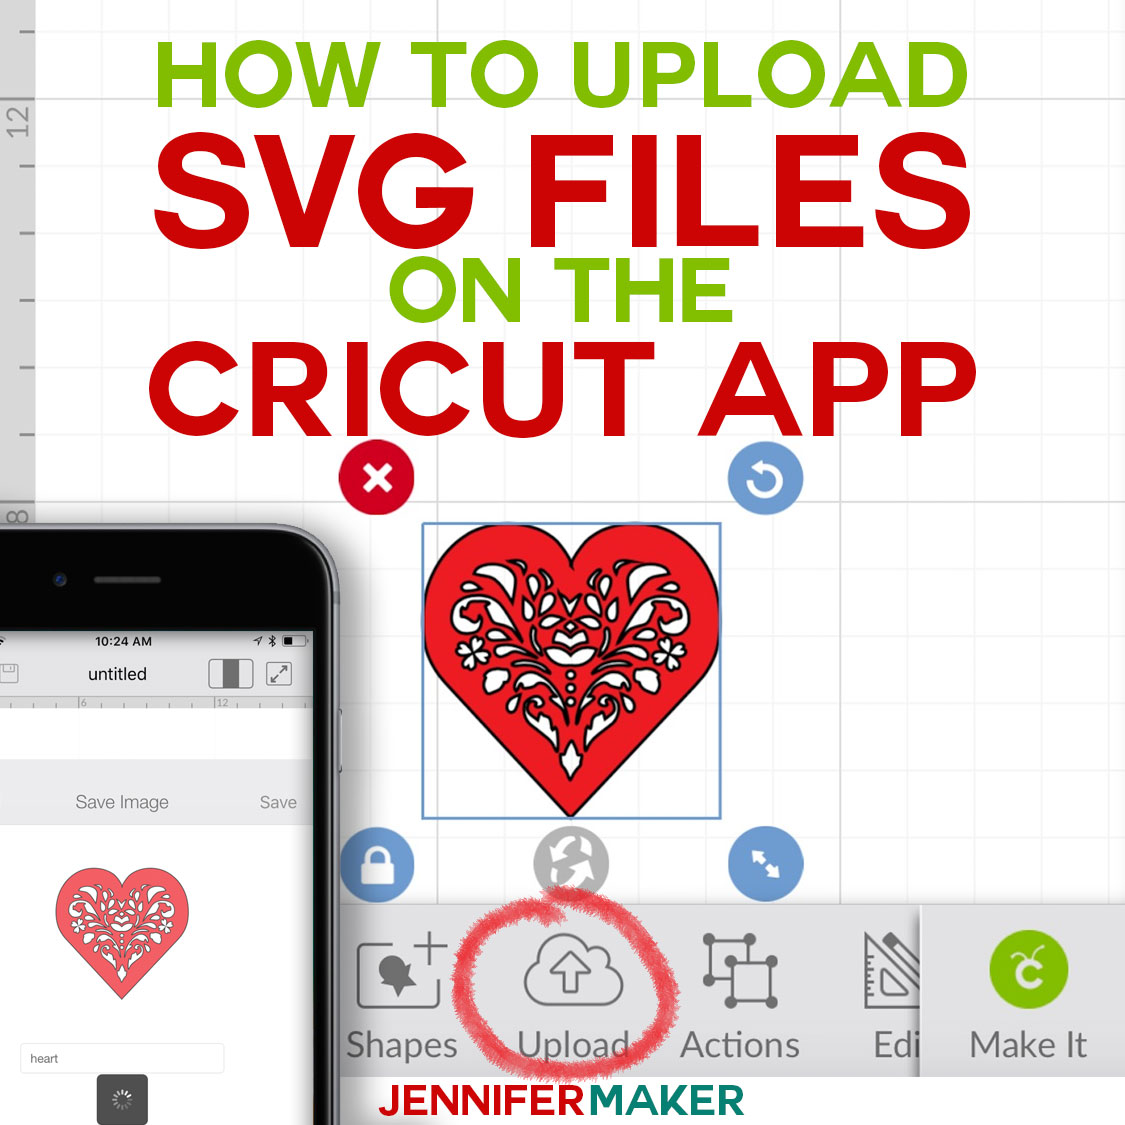 How to Upload SVG Files to Cricut Design Space App on iPhone/iPad